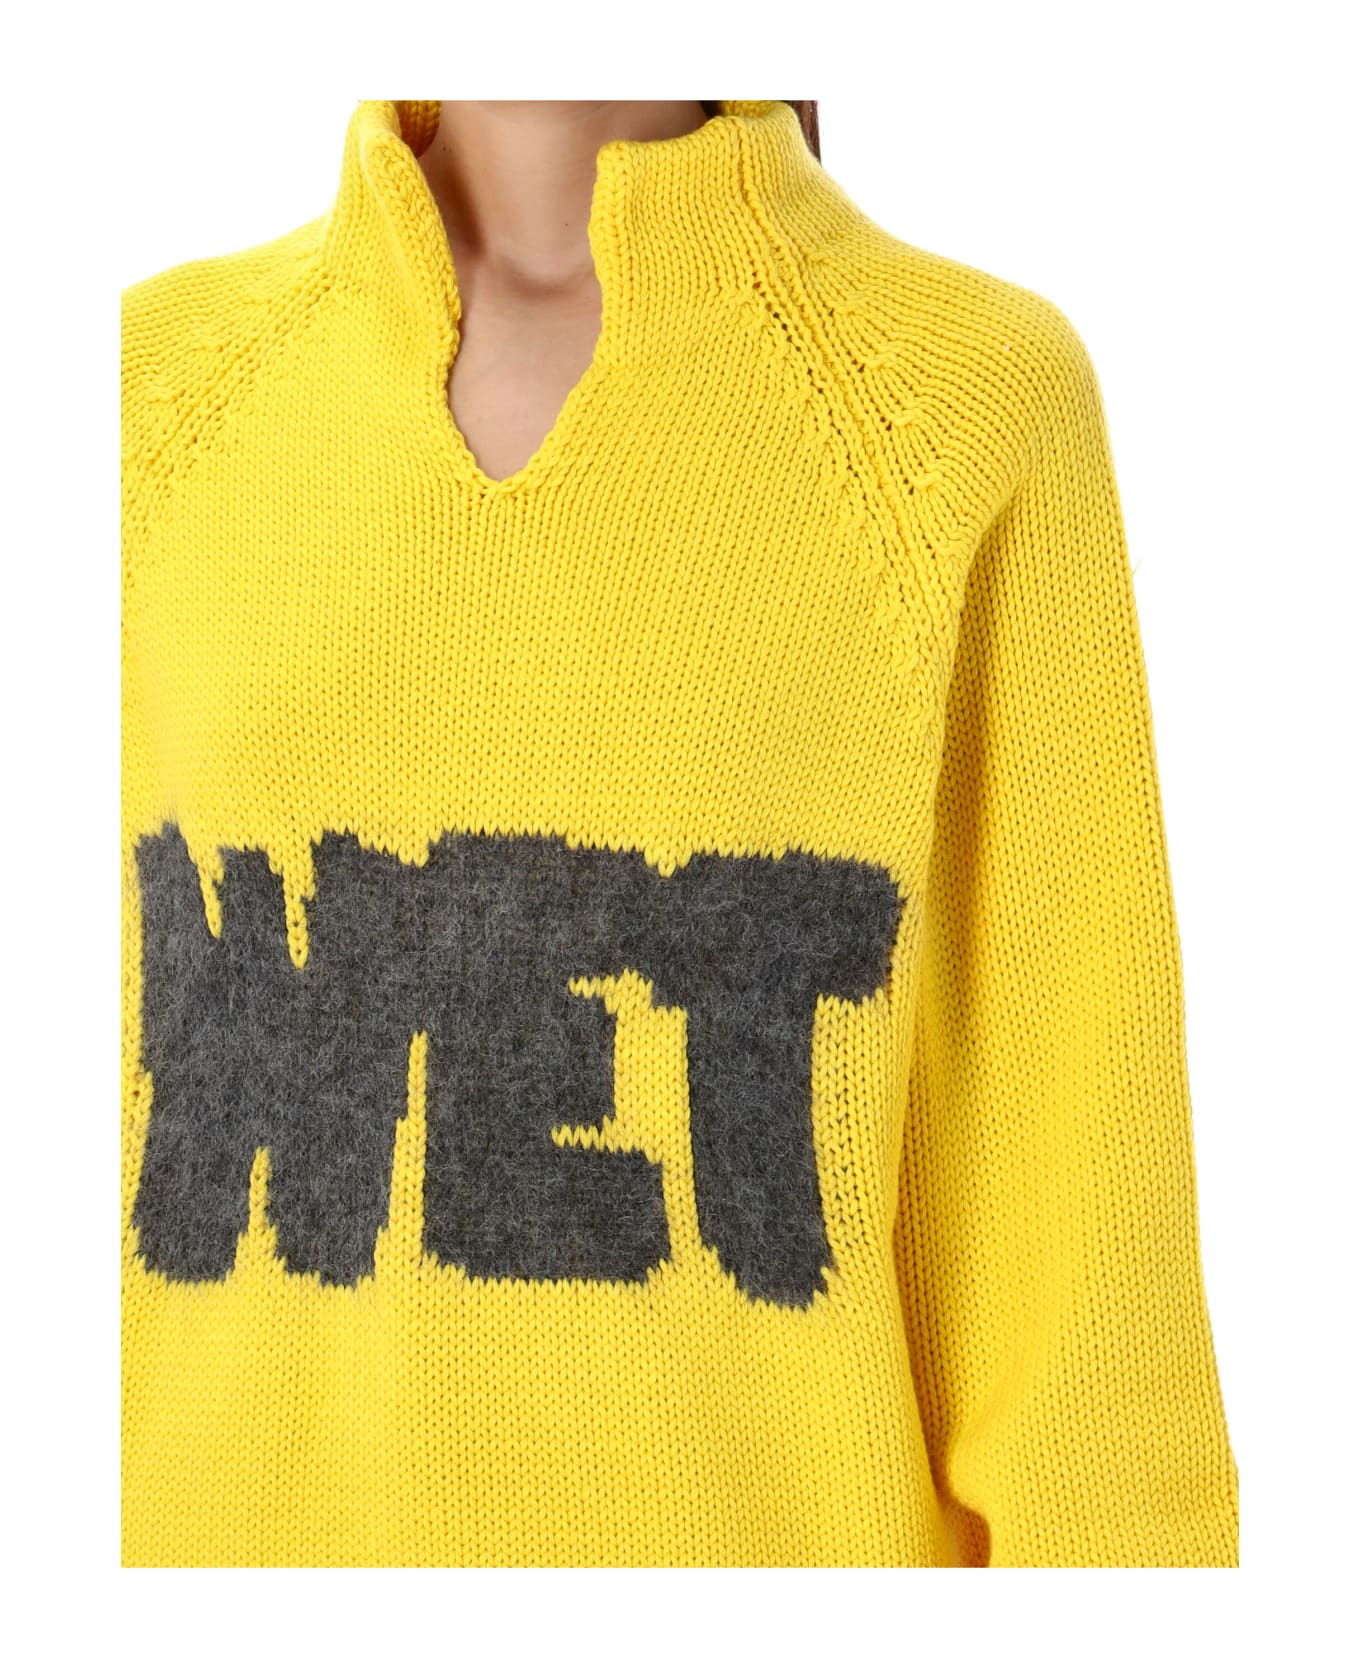 ERL Wet Sweater - YELLOW トップス